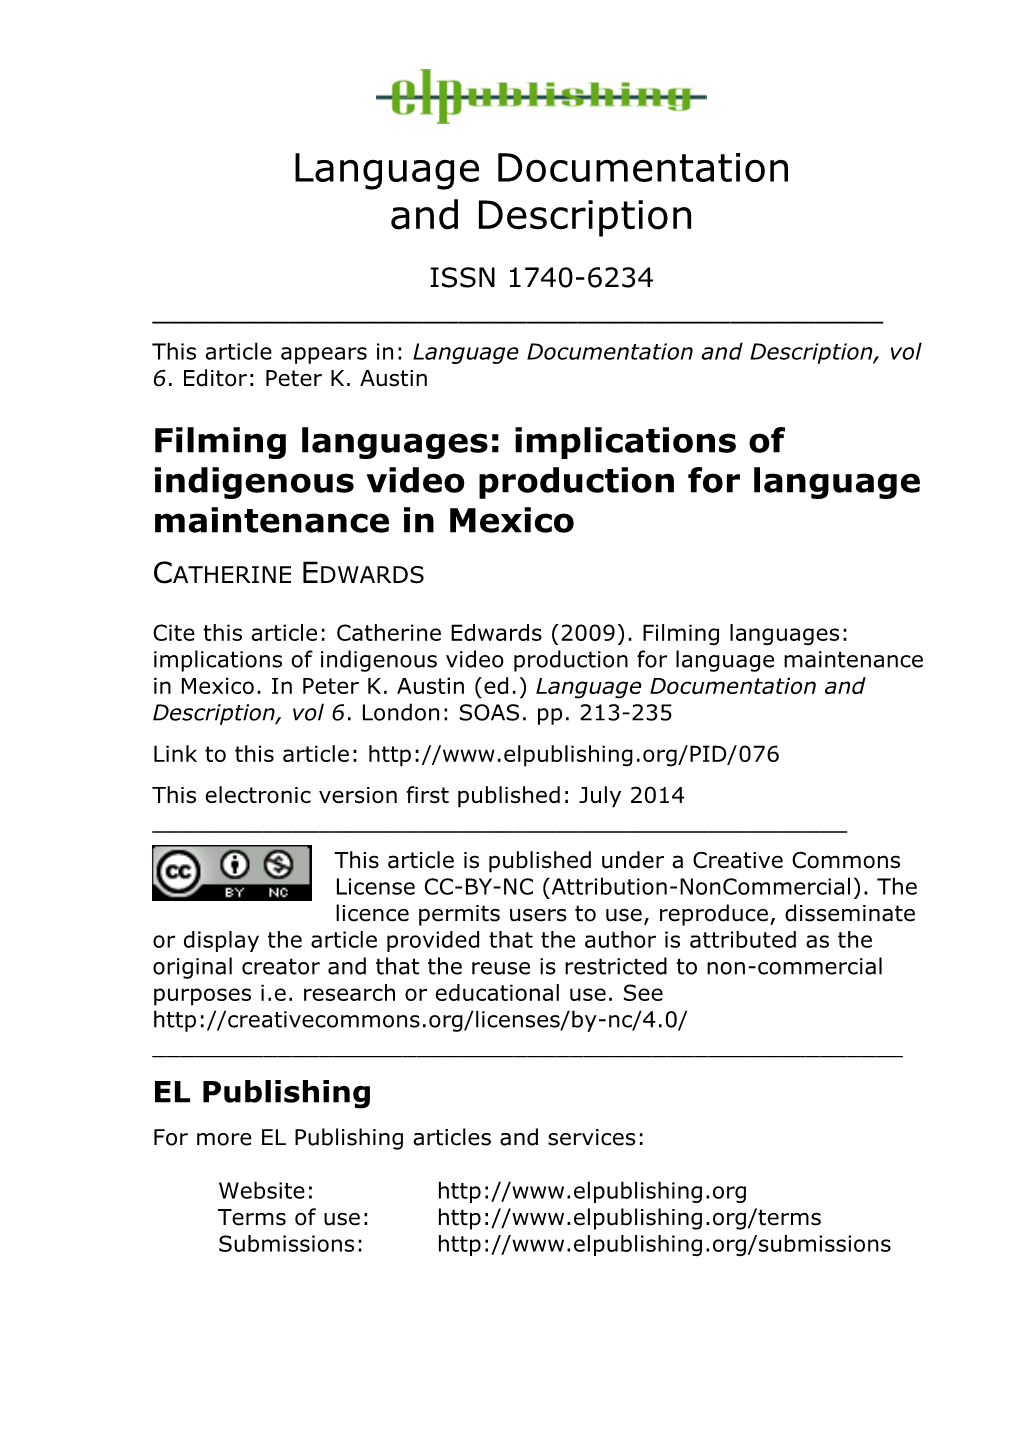 Filming Languages: Implications of Indigenous Video Production for Language Maintenance in Mexico